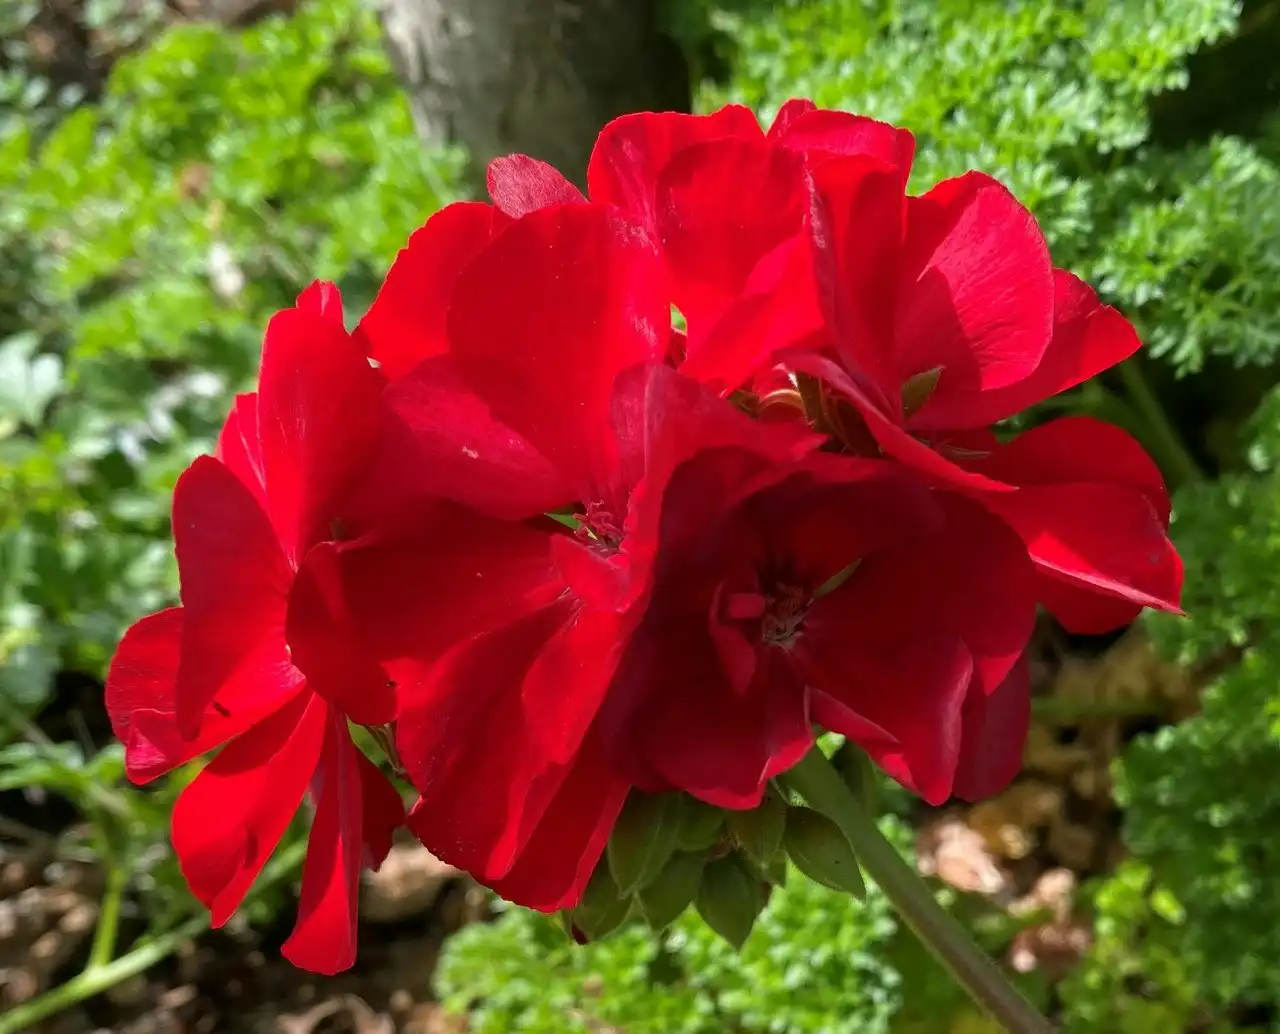 Geranium Big Red  Live Cuttings or Potted Plant